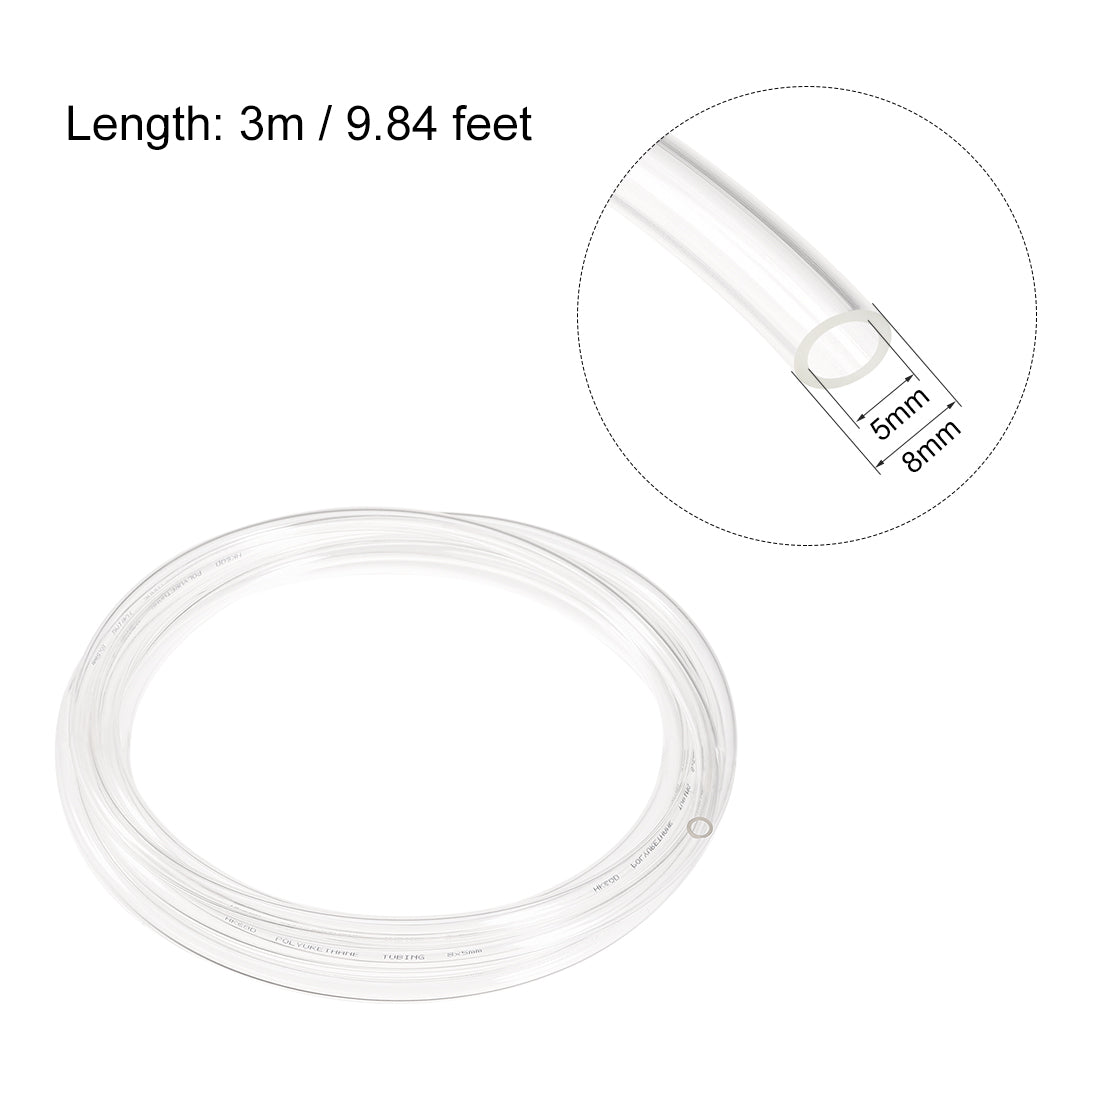 Uxcell Uxcell 8mm OD 5mm ID 7m Long Clear PU Air Tubing Pipe Hose for Air Line Tube Fluid Transfer Pneumatic Tubing